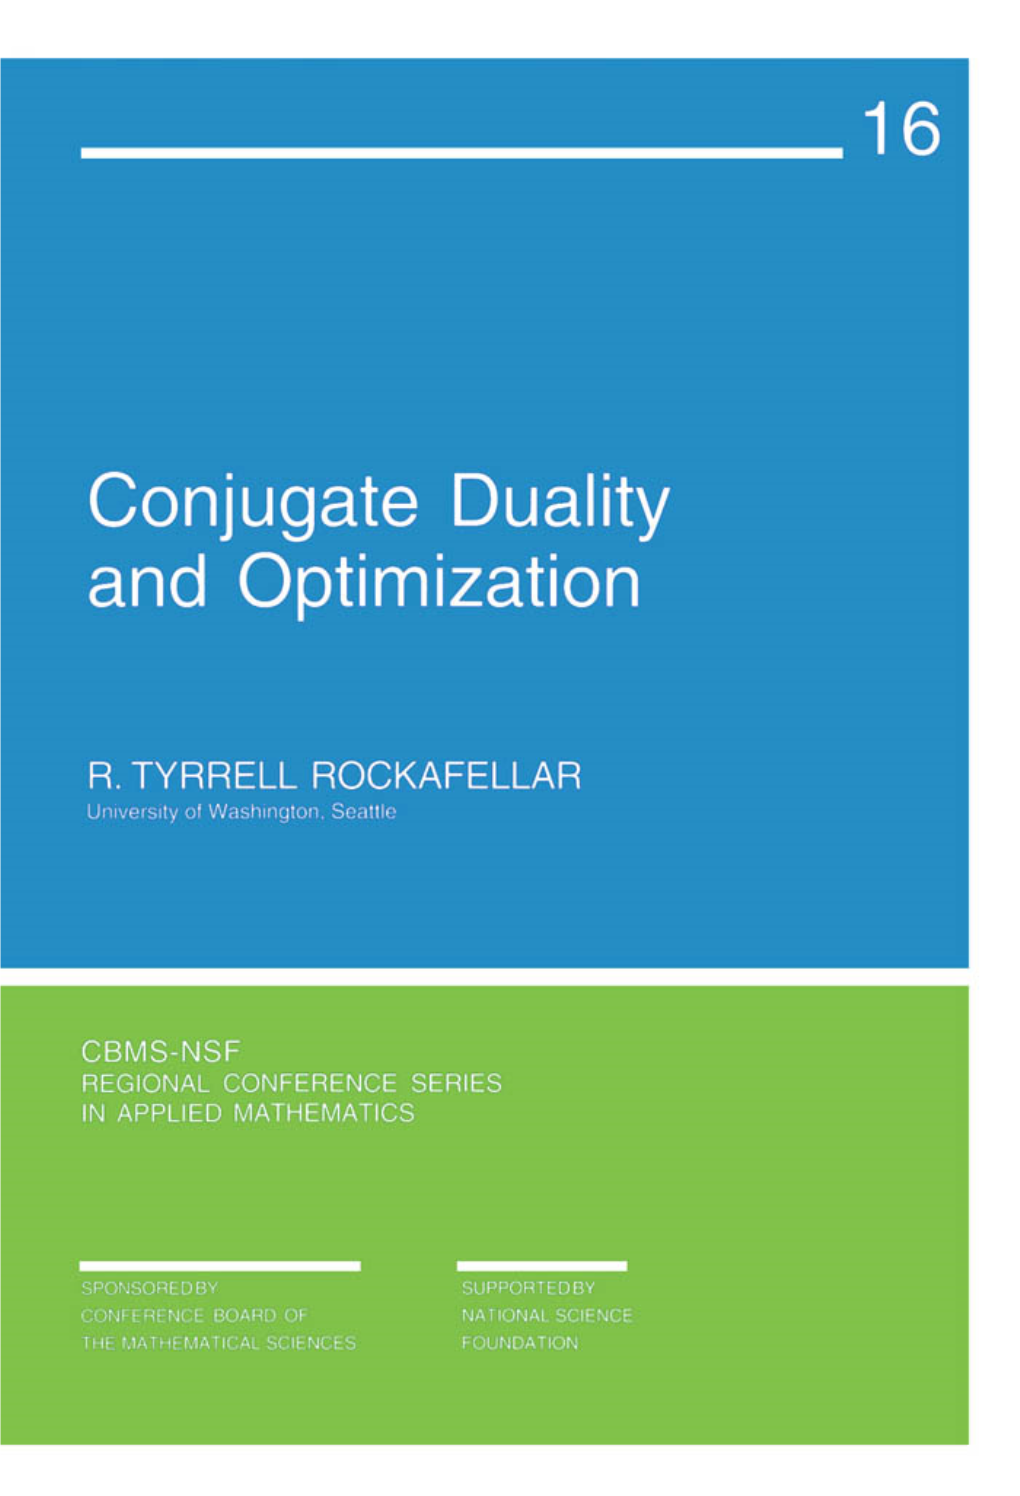 Conjugate Duality and Optimization CBMS-NSF REGIONAL CONFERENCE SERIES in APPLIED MATHEMATICS